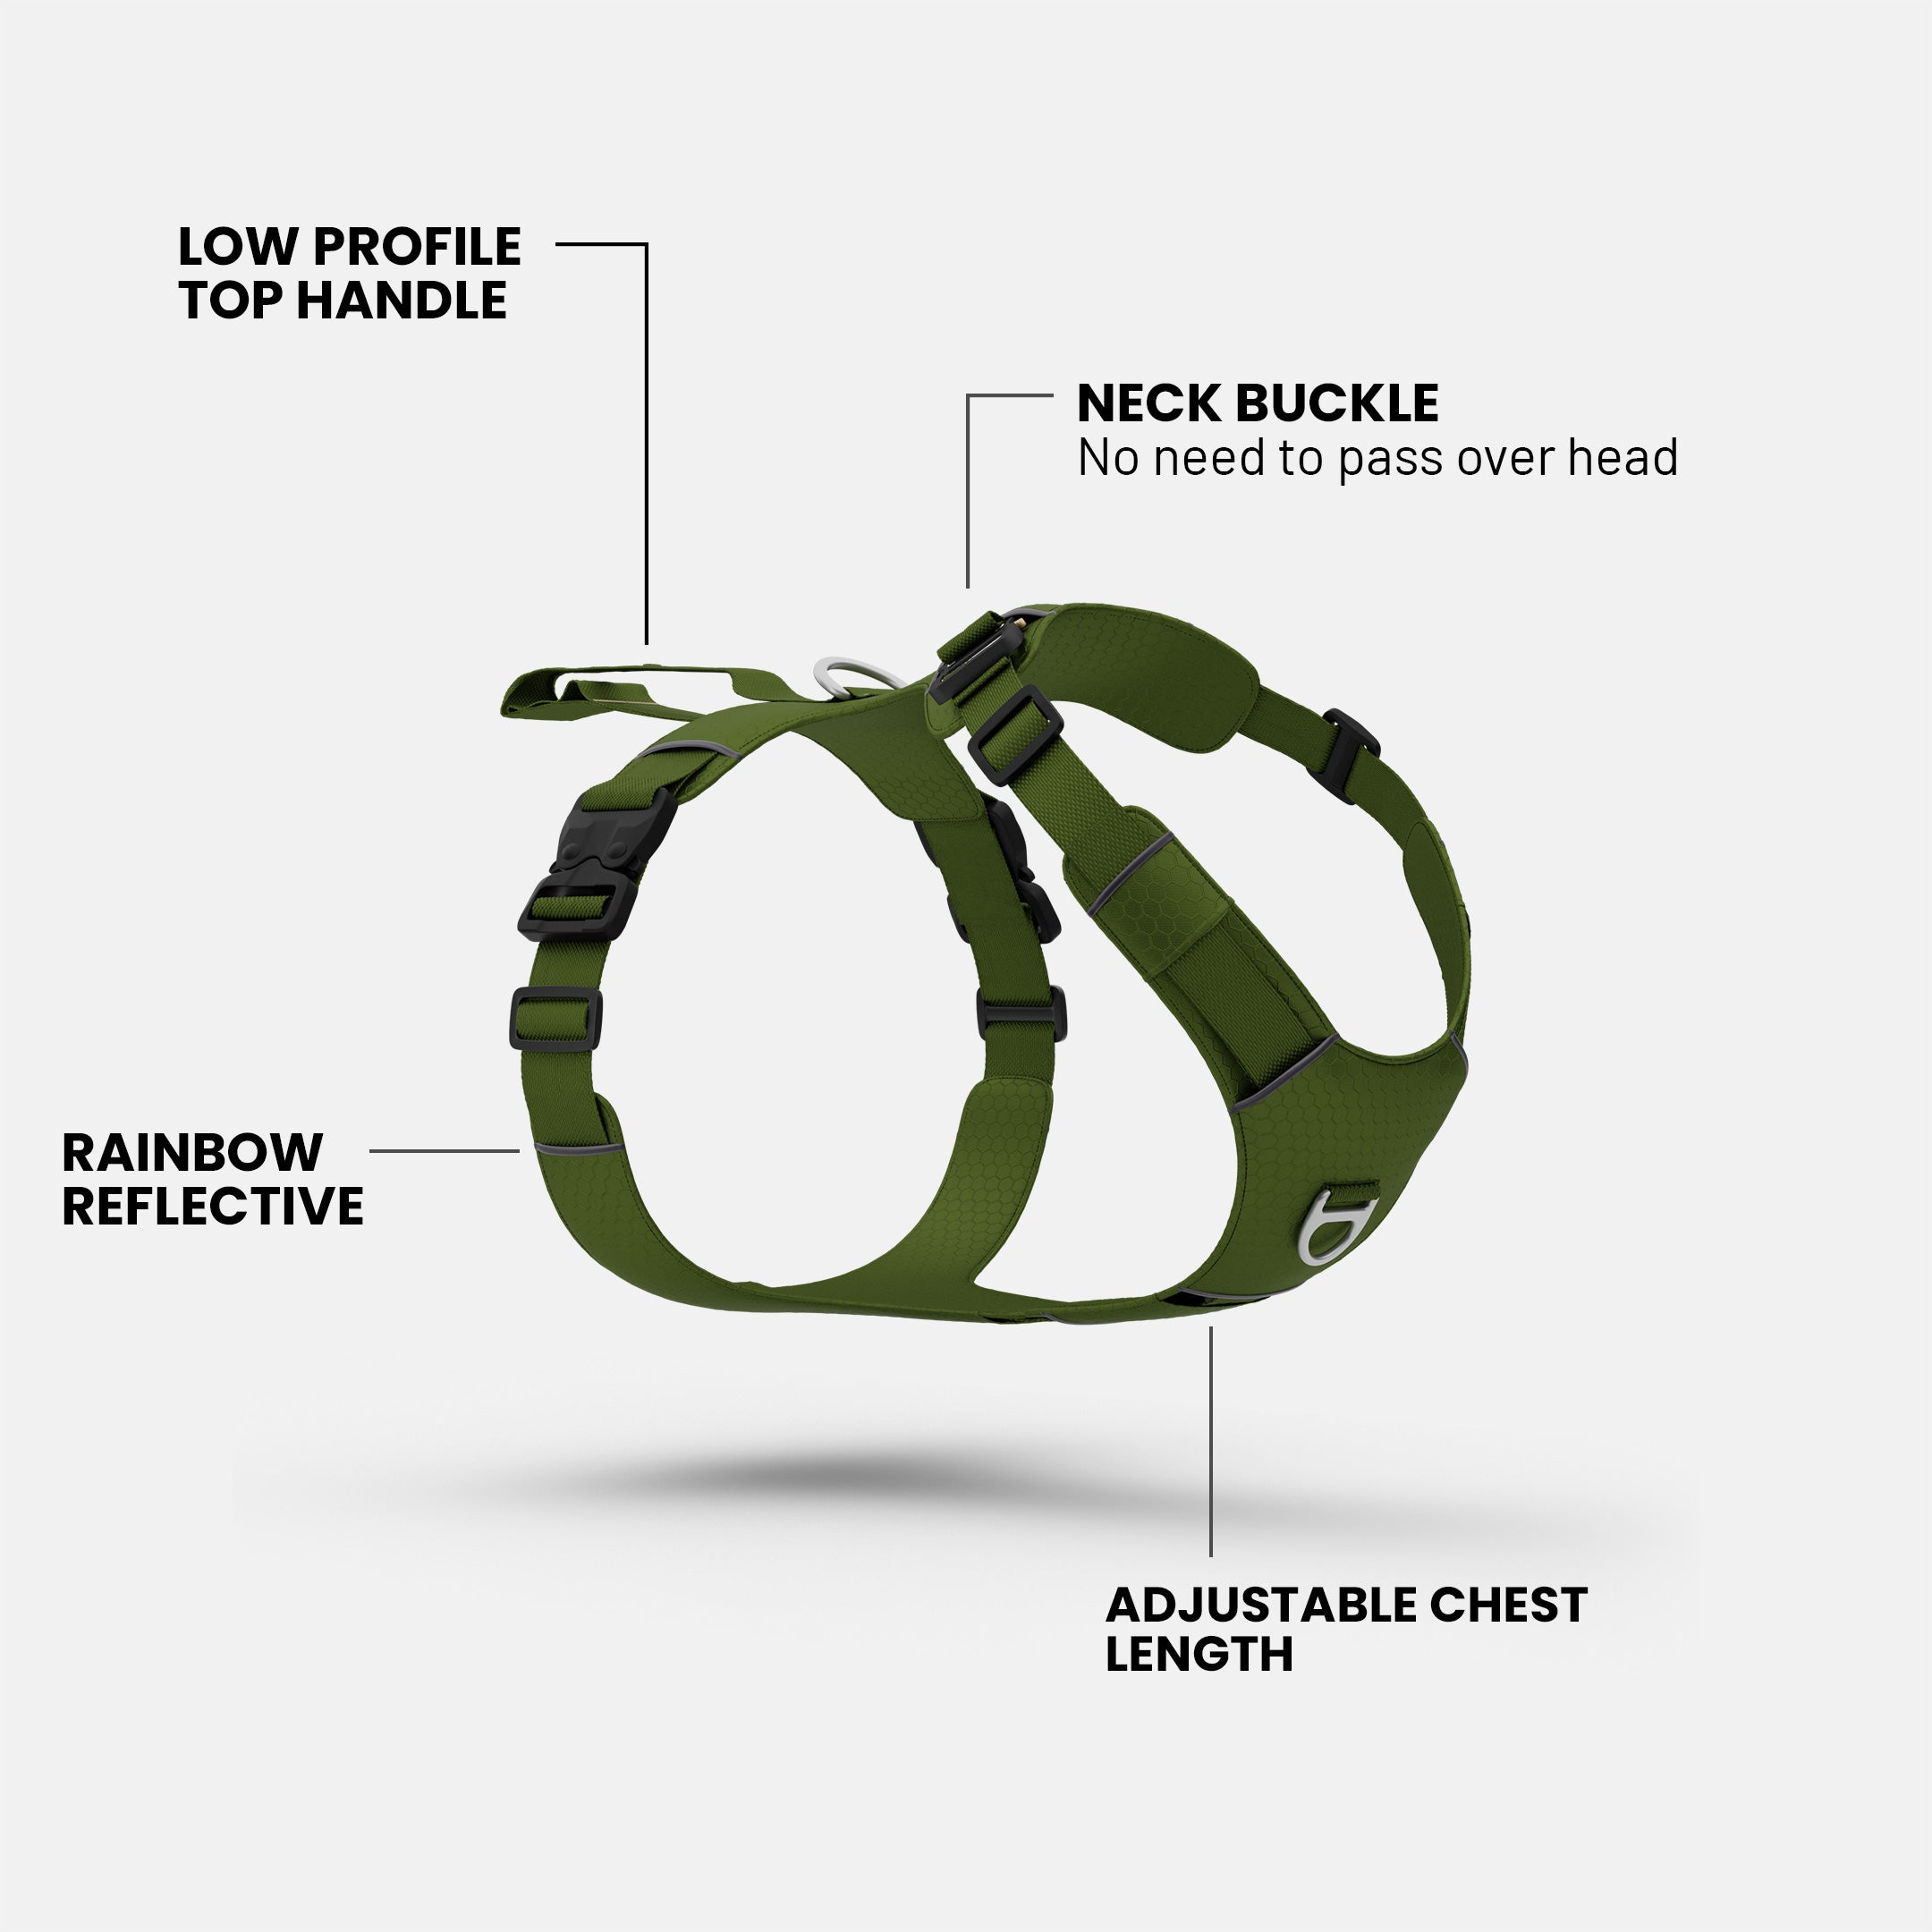 Features of the Canyon Light Core harness